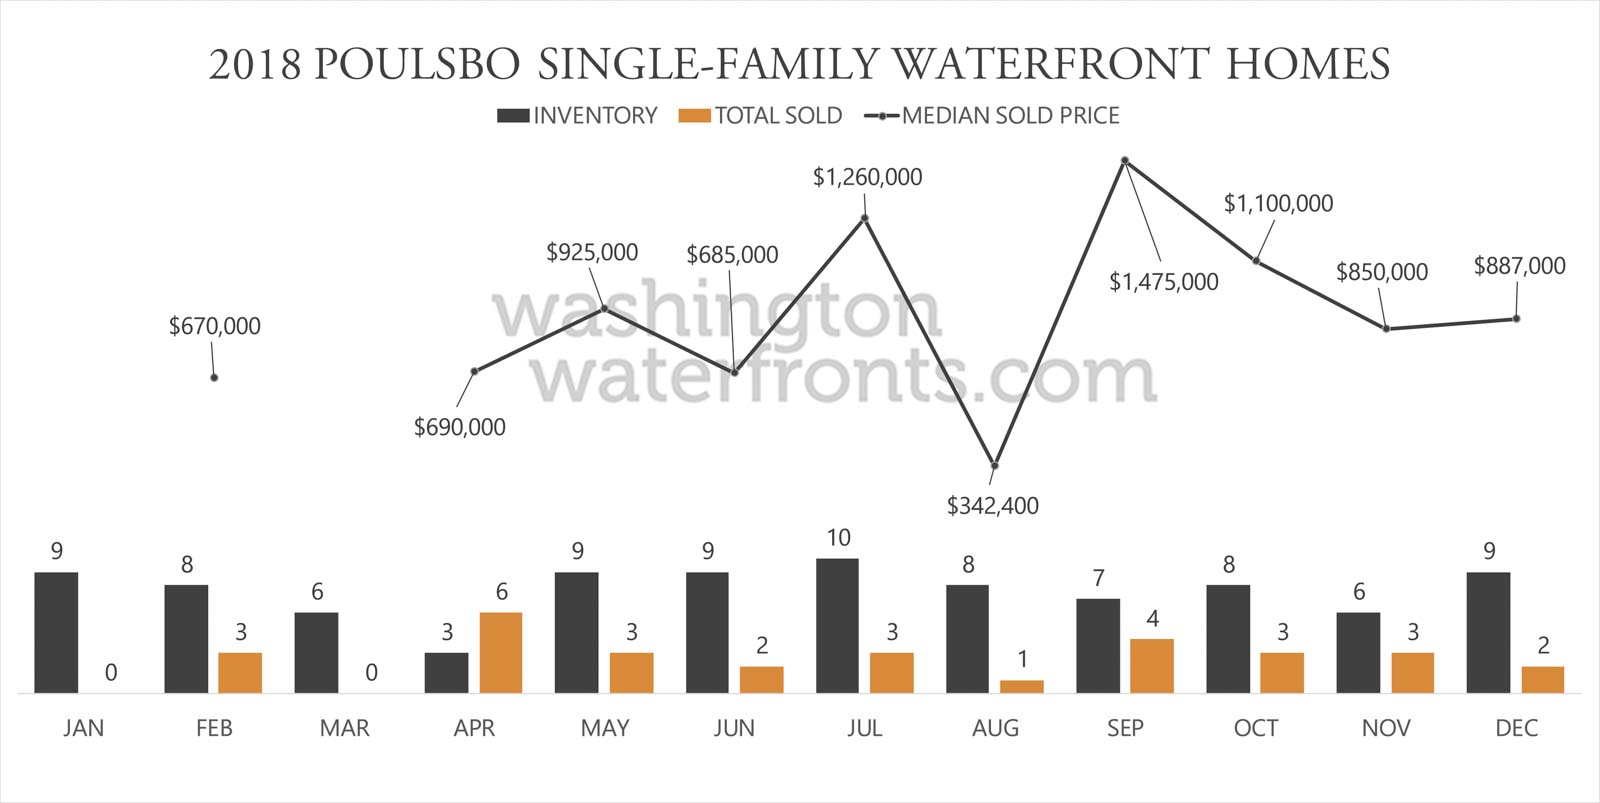 Poulsbo Waterfront Inventory